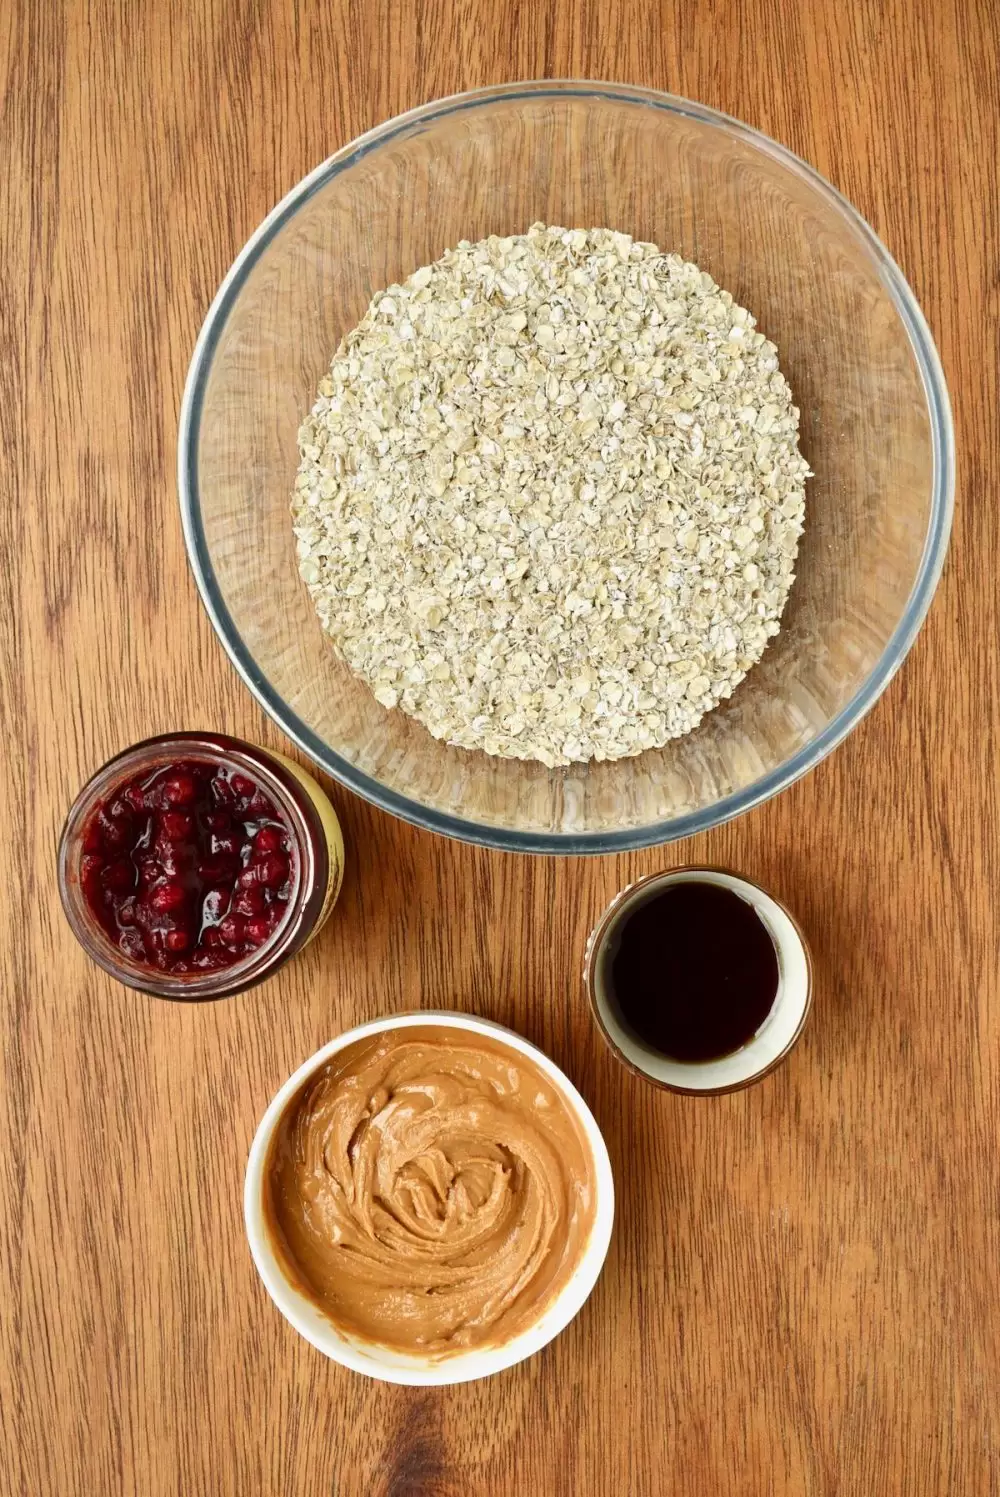 Ingredients on a wooden board - a bowl of oats, jar of jam, maple syrup and smooth peanut butter